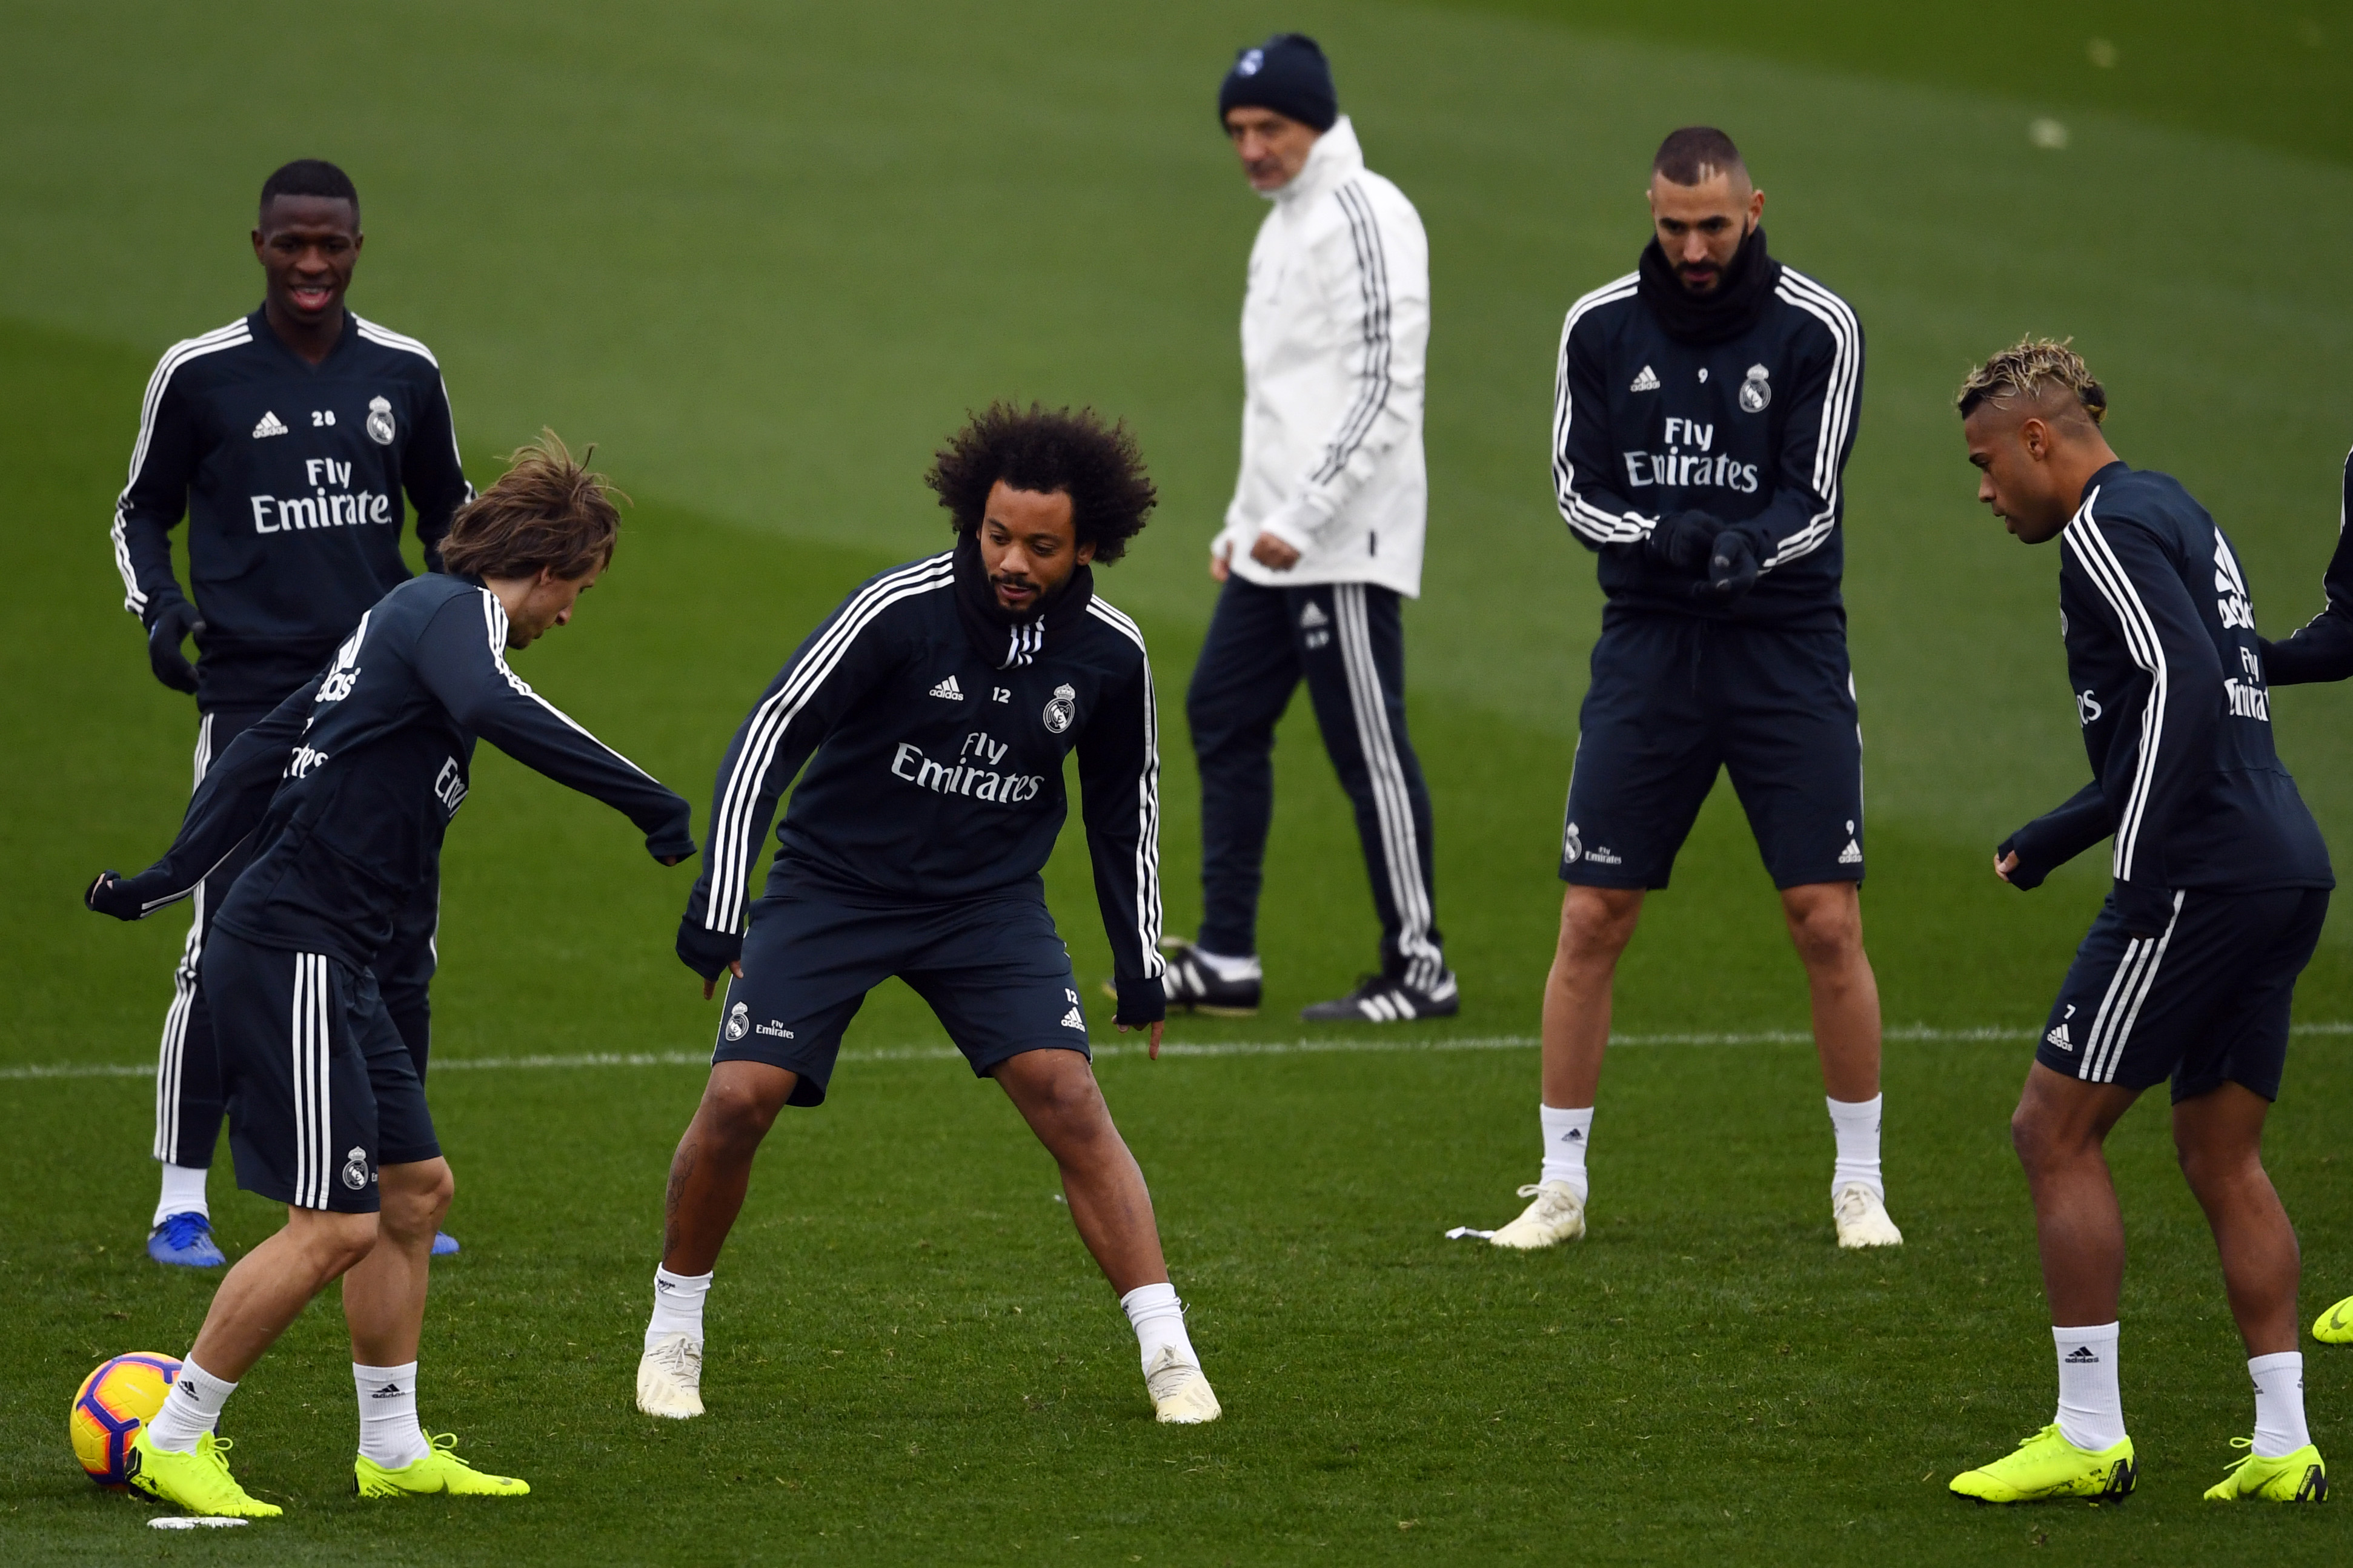 (L to R) Real Madrid's Brazilian forward Vinicius Junior, Real Madrid's Croatian midfielder Luka Modric, Real Madrid's Brazilian defender Marcelo, Real Madrid's French forward Karim Benzema and Real Madrid's Spanish-Dominican forward Mariano attend a training session at the Ciudad Real Madrid training facilities in Madrid's suburb of Valdebebas, on October 27, 2018 on the eve of the Spanish League "Clasico" football match Real Madrid CF vs FC Barcelona. (Photo by GABRIEL BOUYS / AFP)        (Photo credit should read GABRIEL BOUYS/AFP/Getty Images)